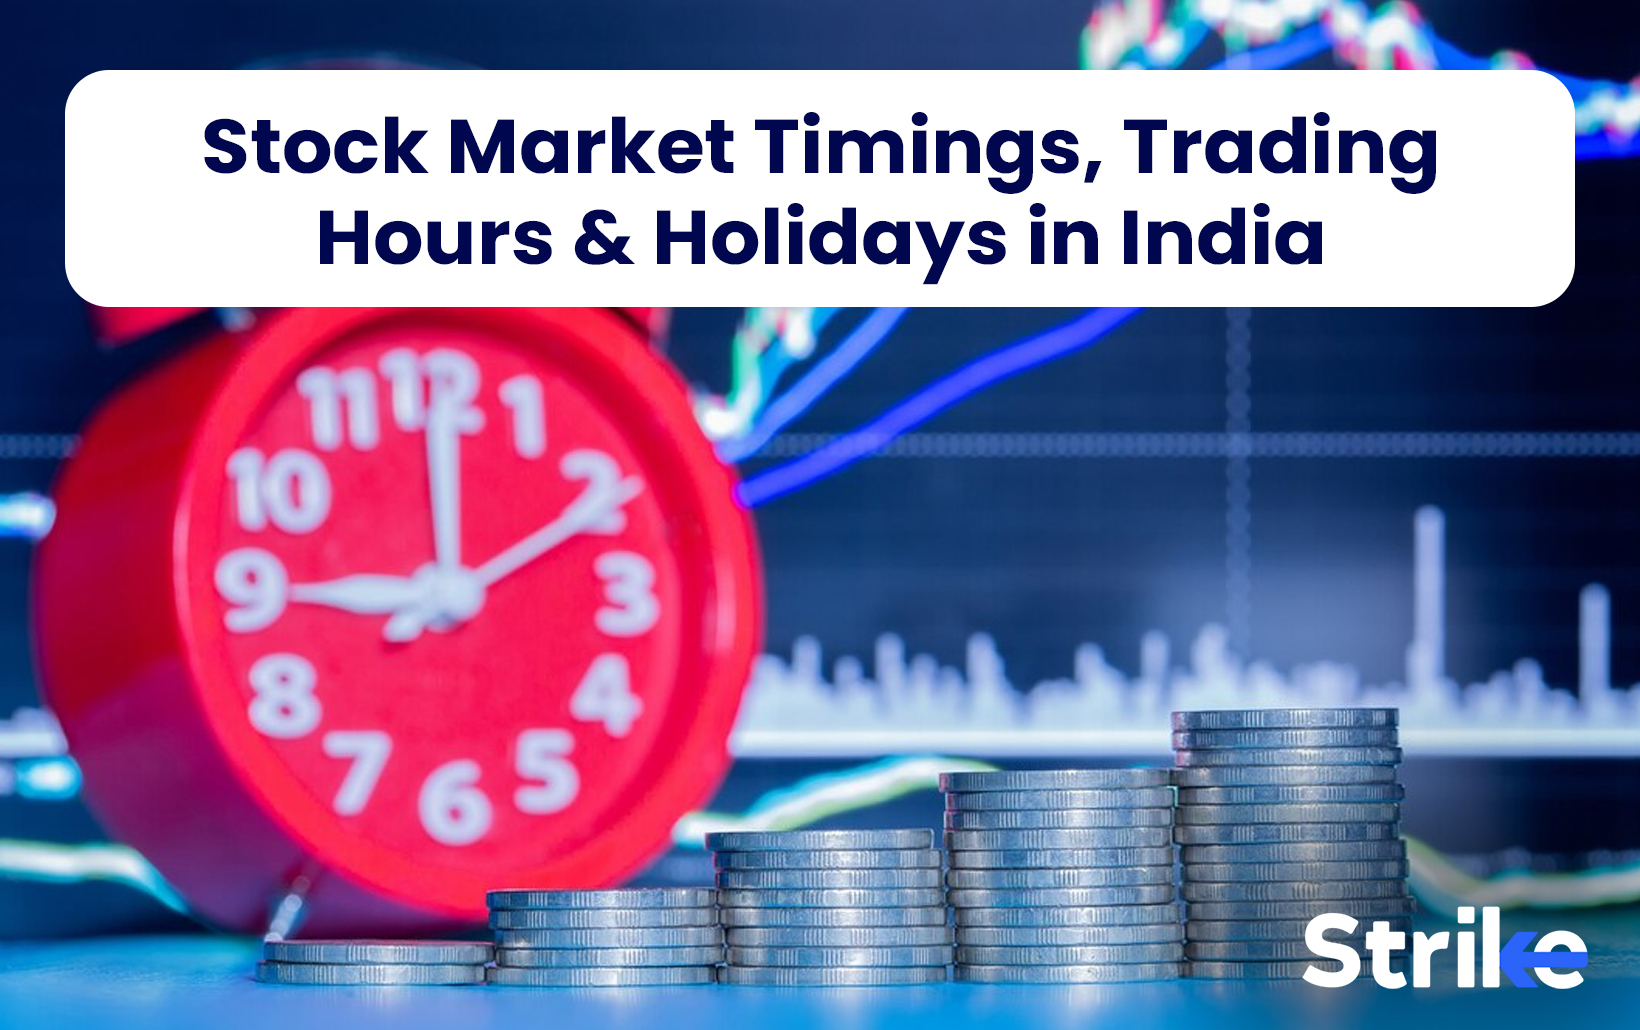 Stock Market Timings, Trading Hours & Holidays in India